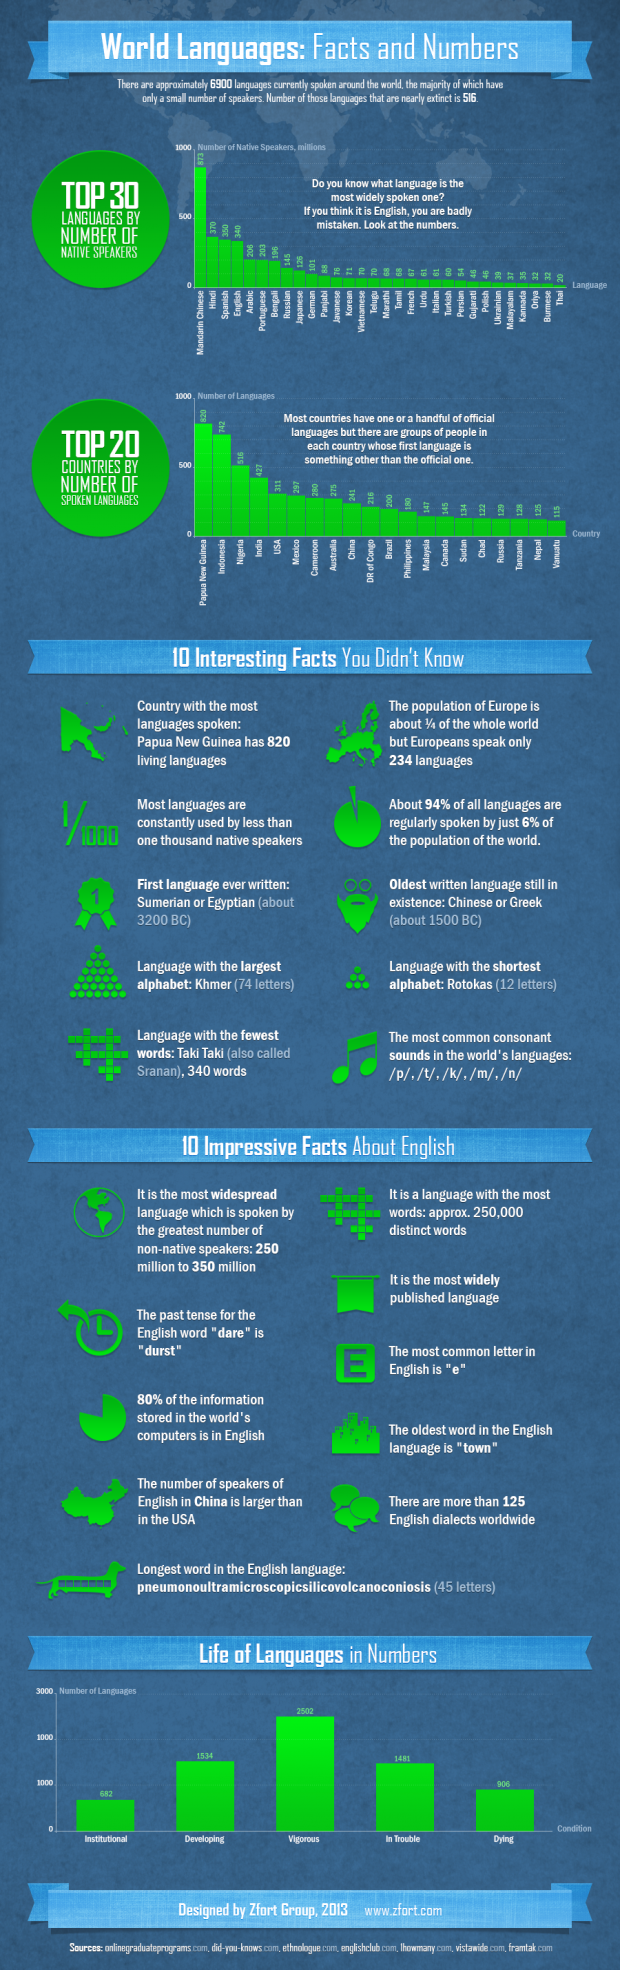 World-Languages-Facts-and-Numbers